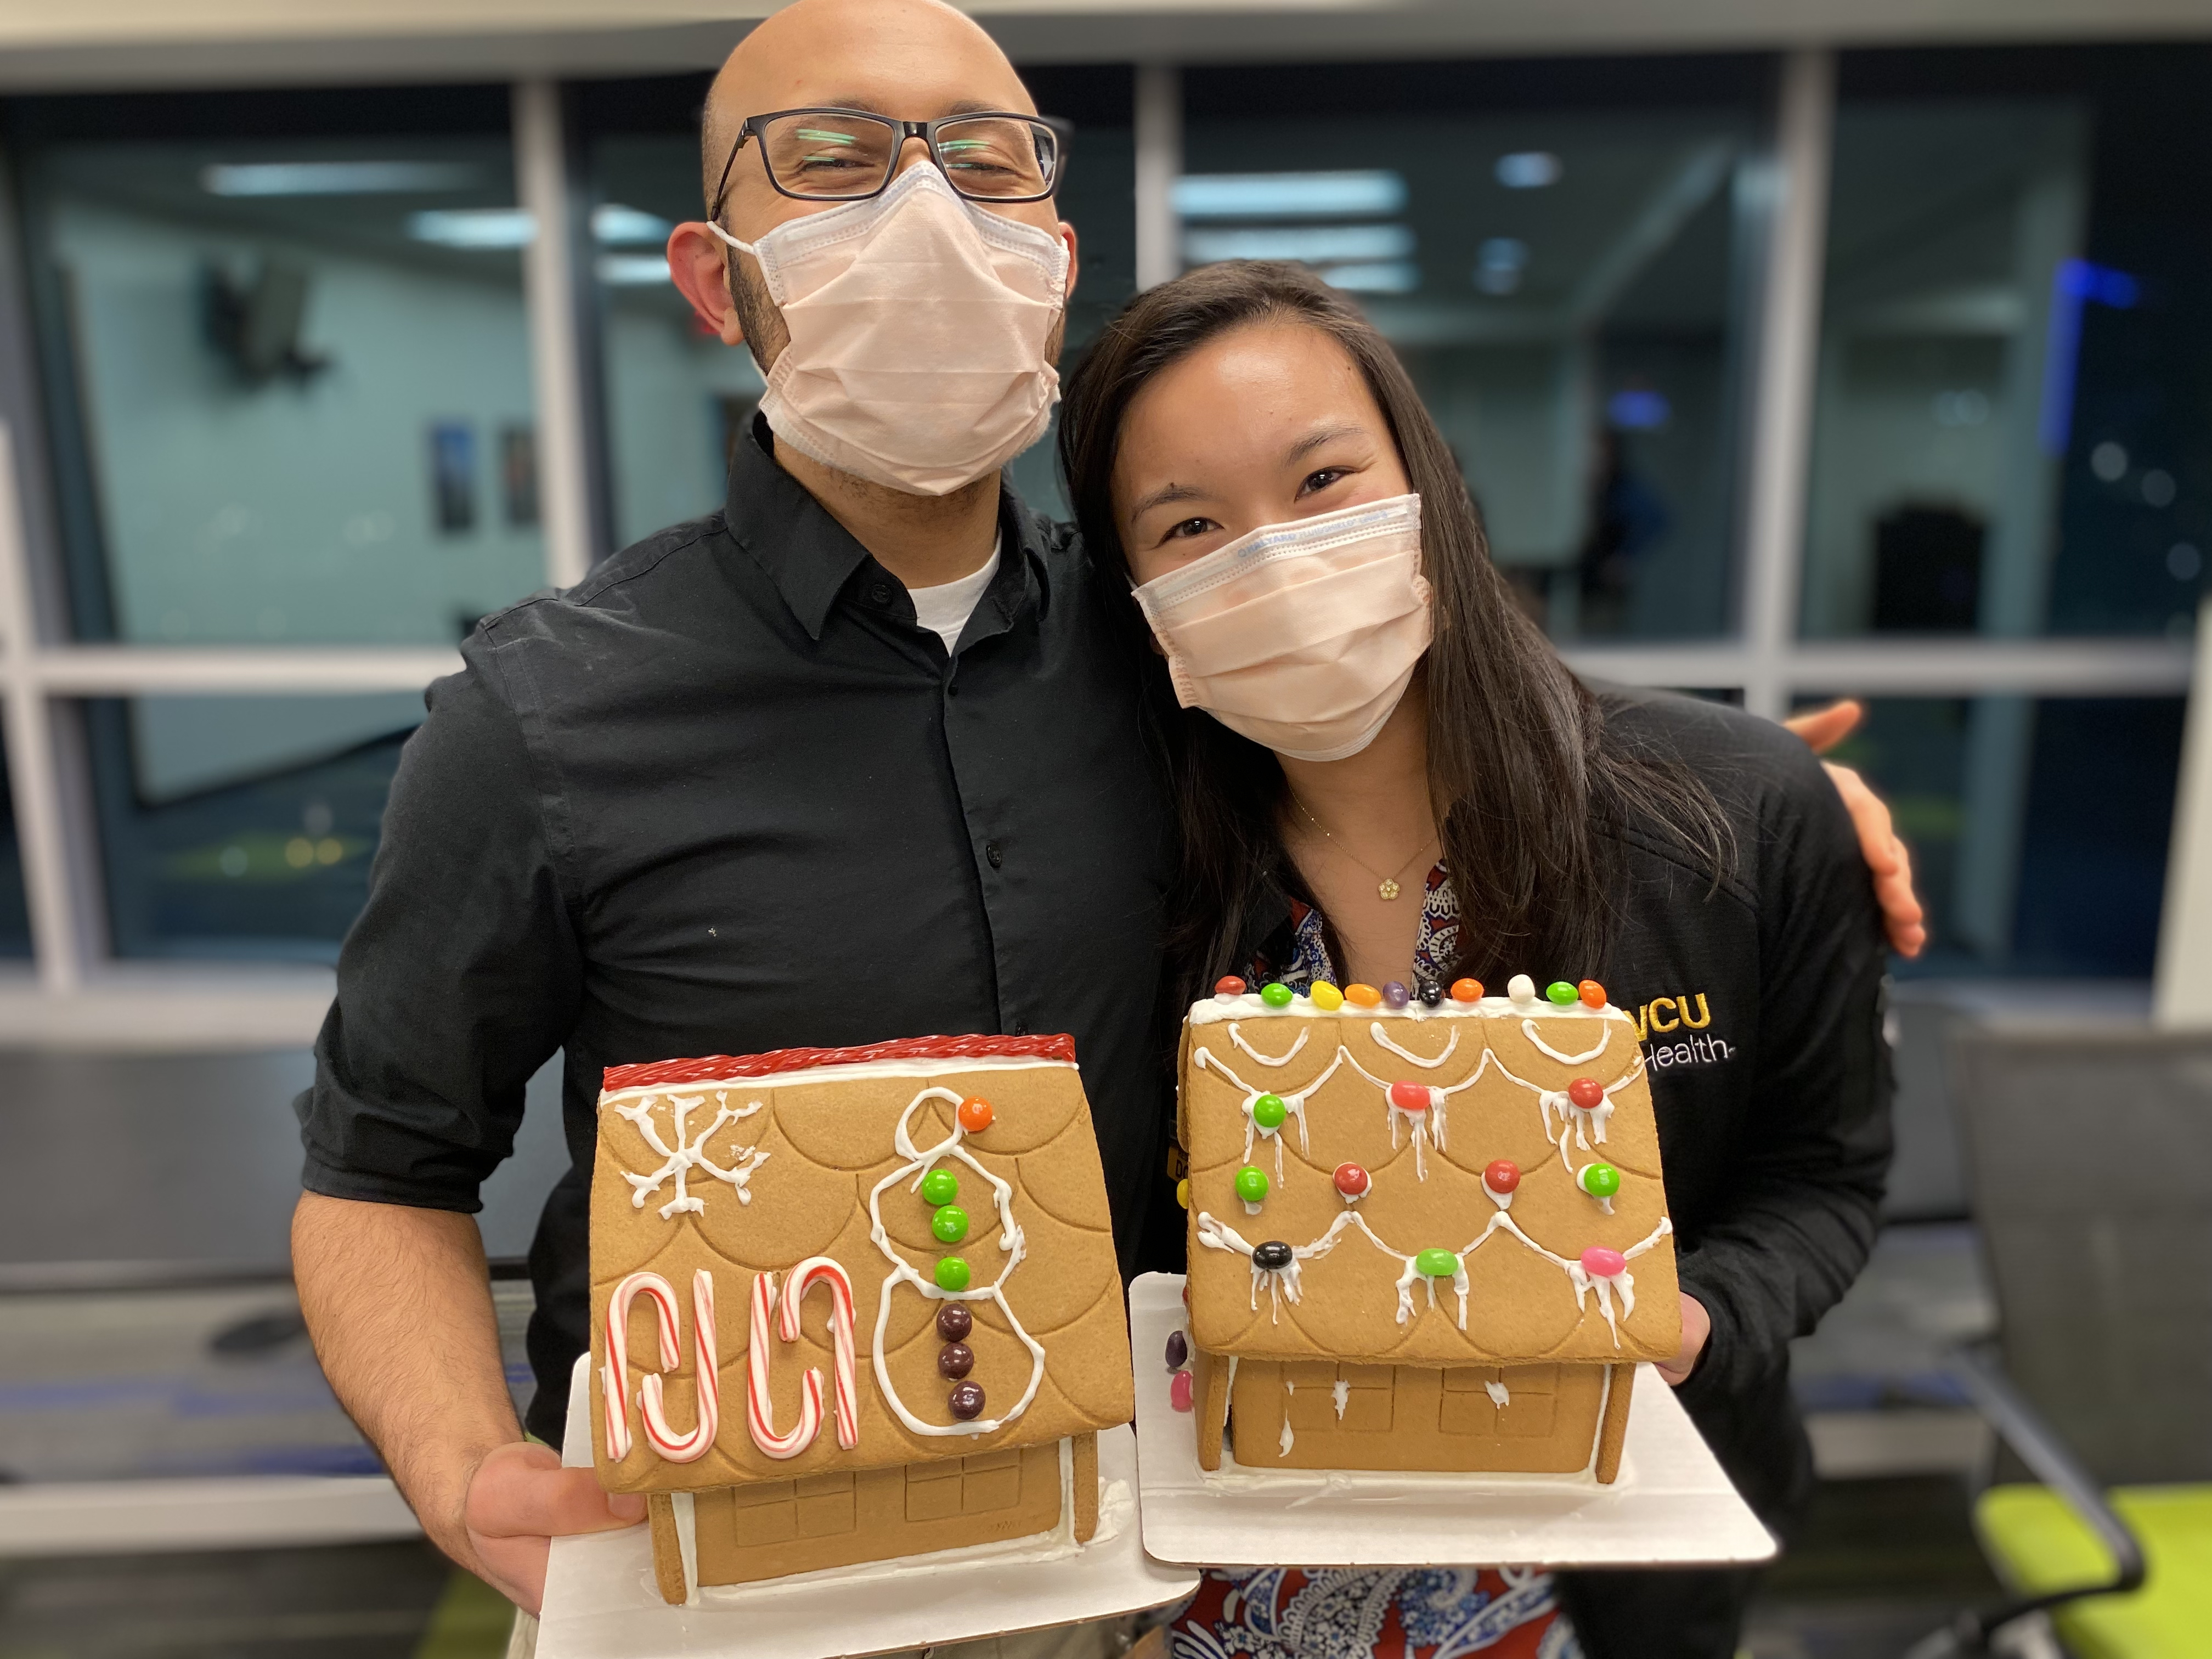 Two residents display the gingerbread houses they decorated at a wellness event